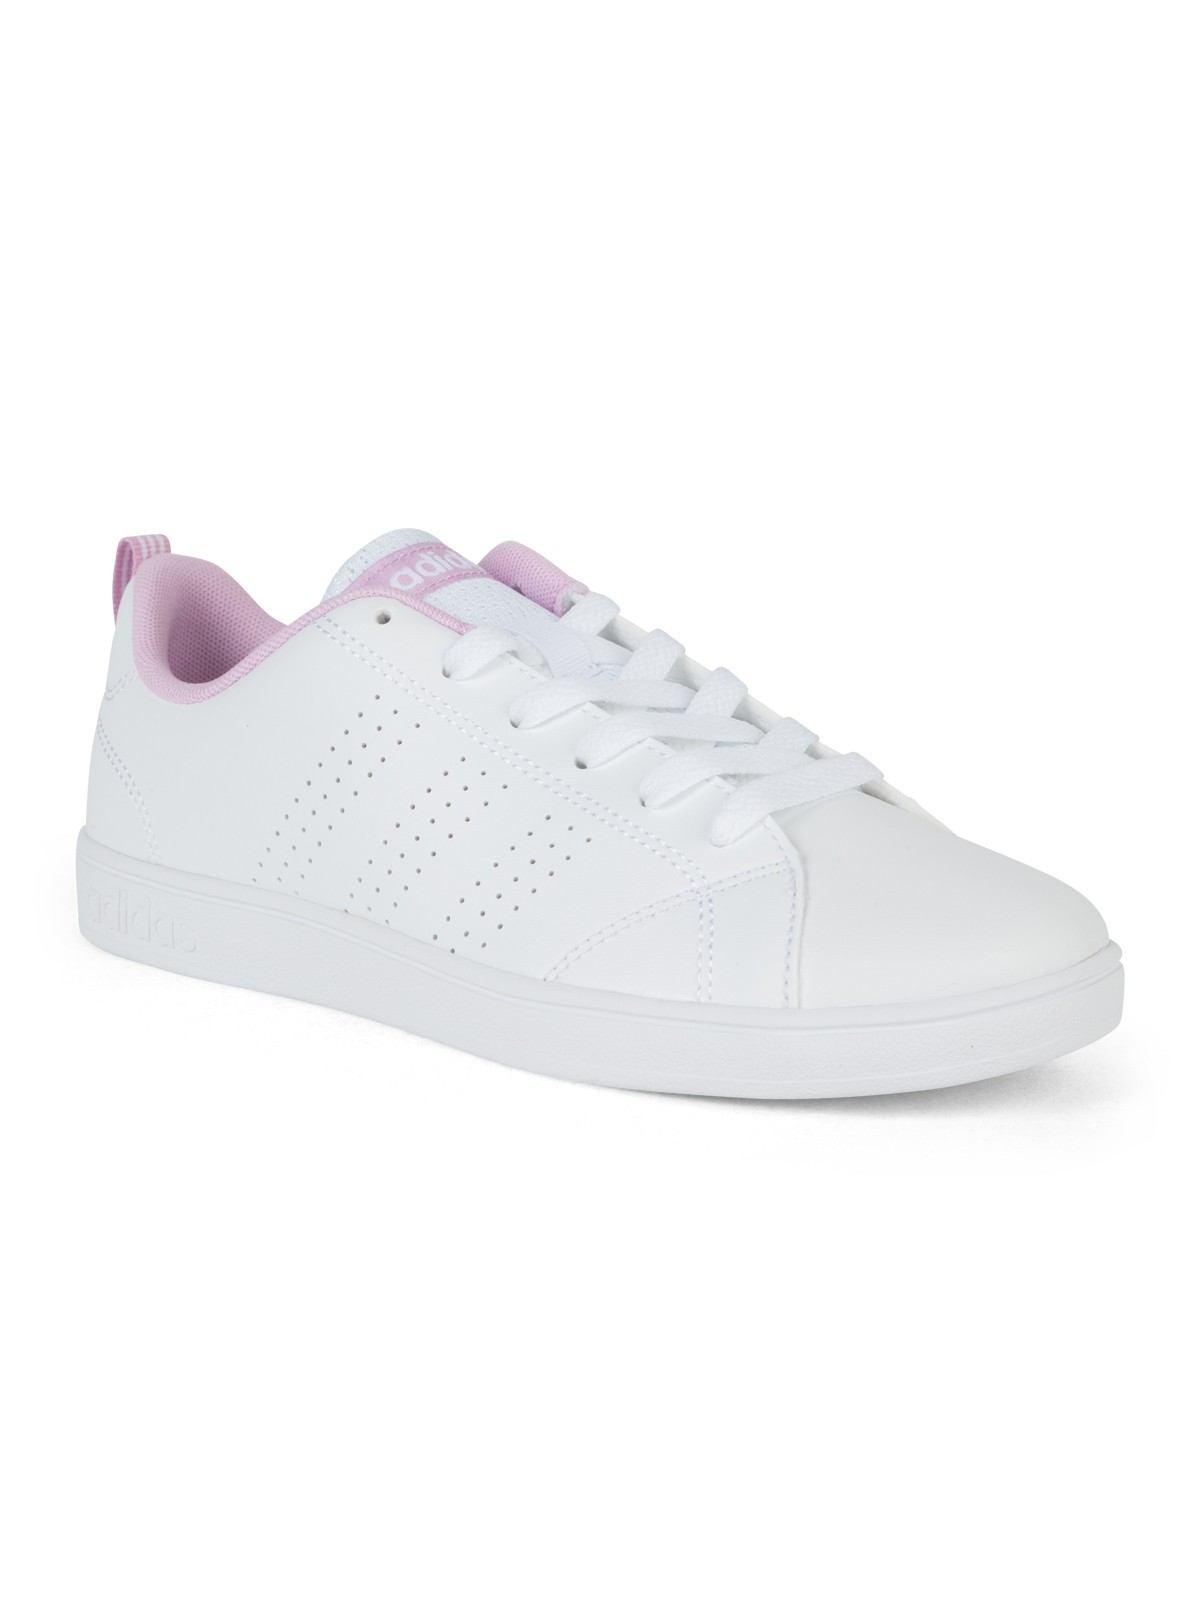 basket neo adidas femme buy clothes shoes online